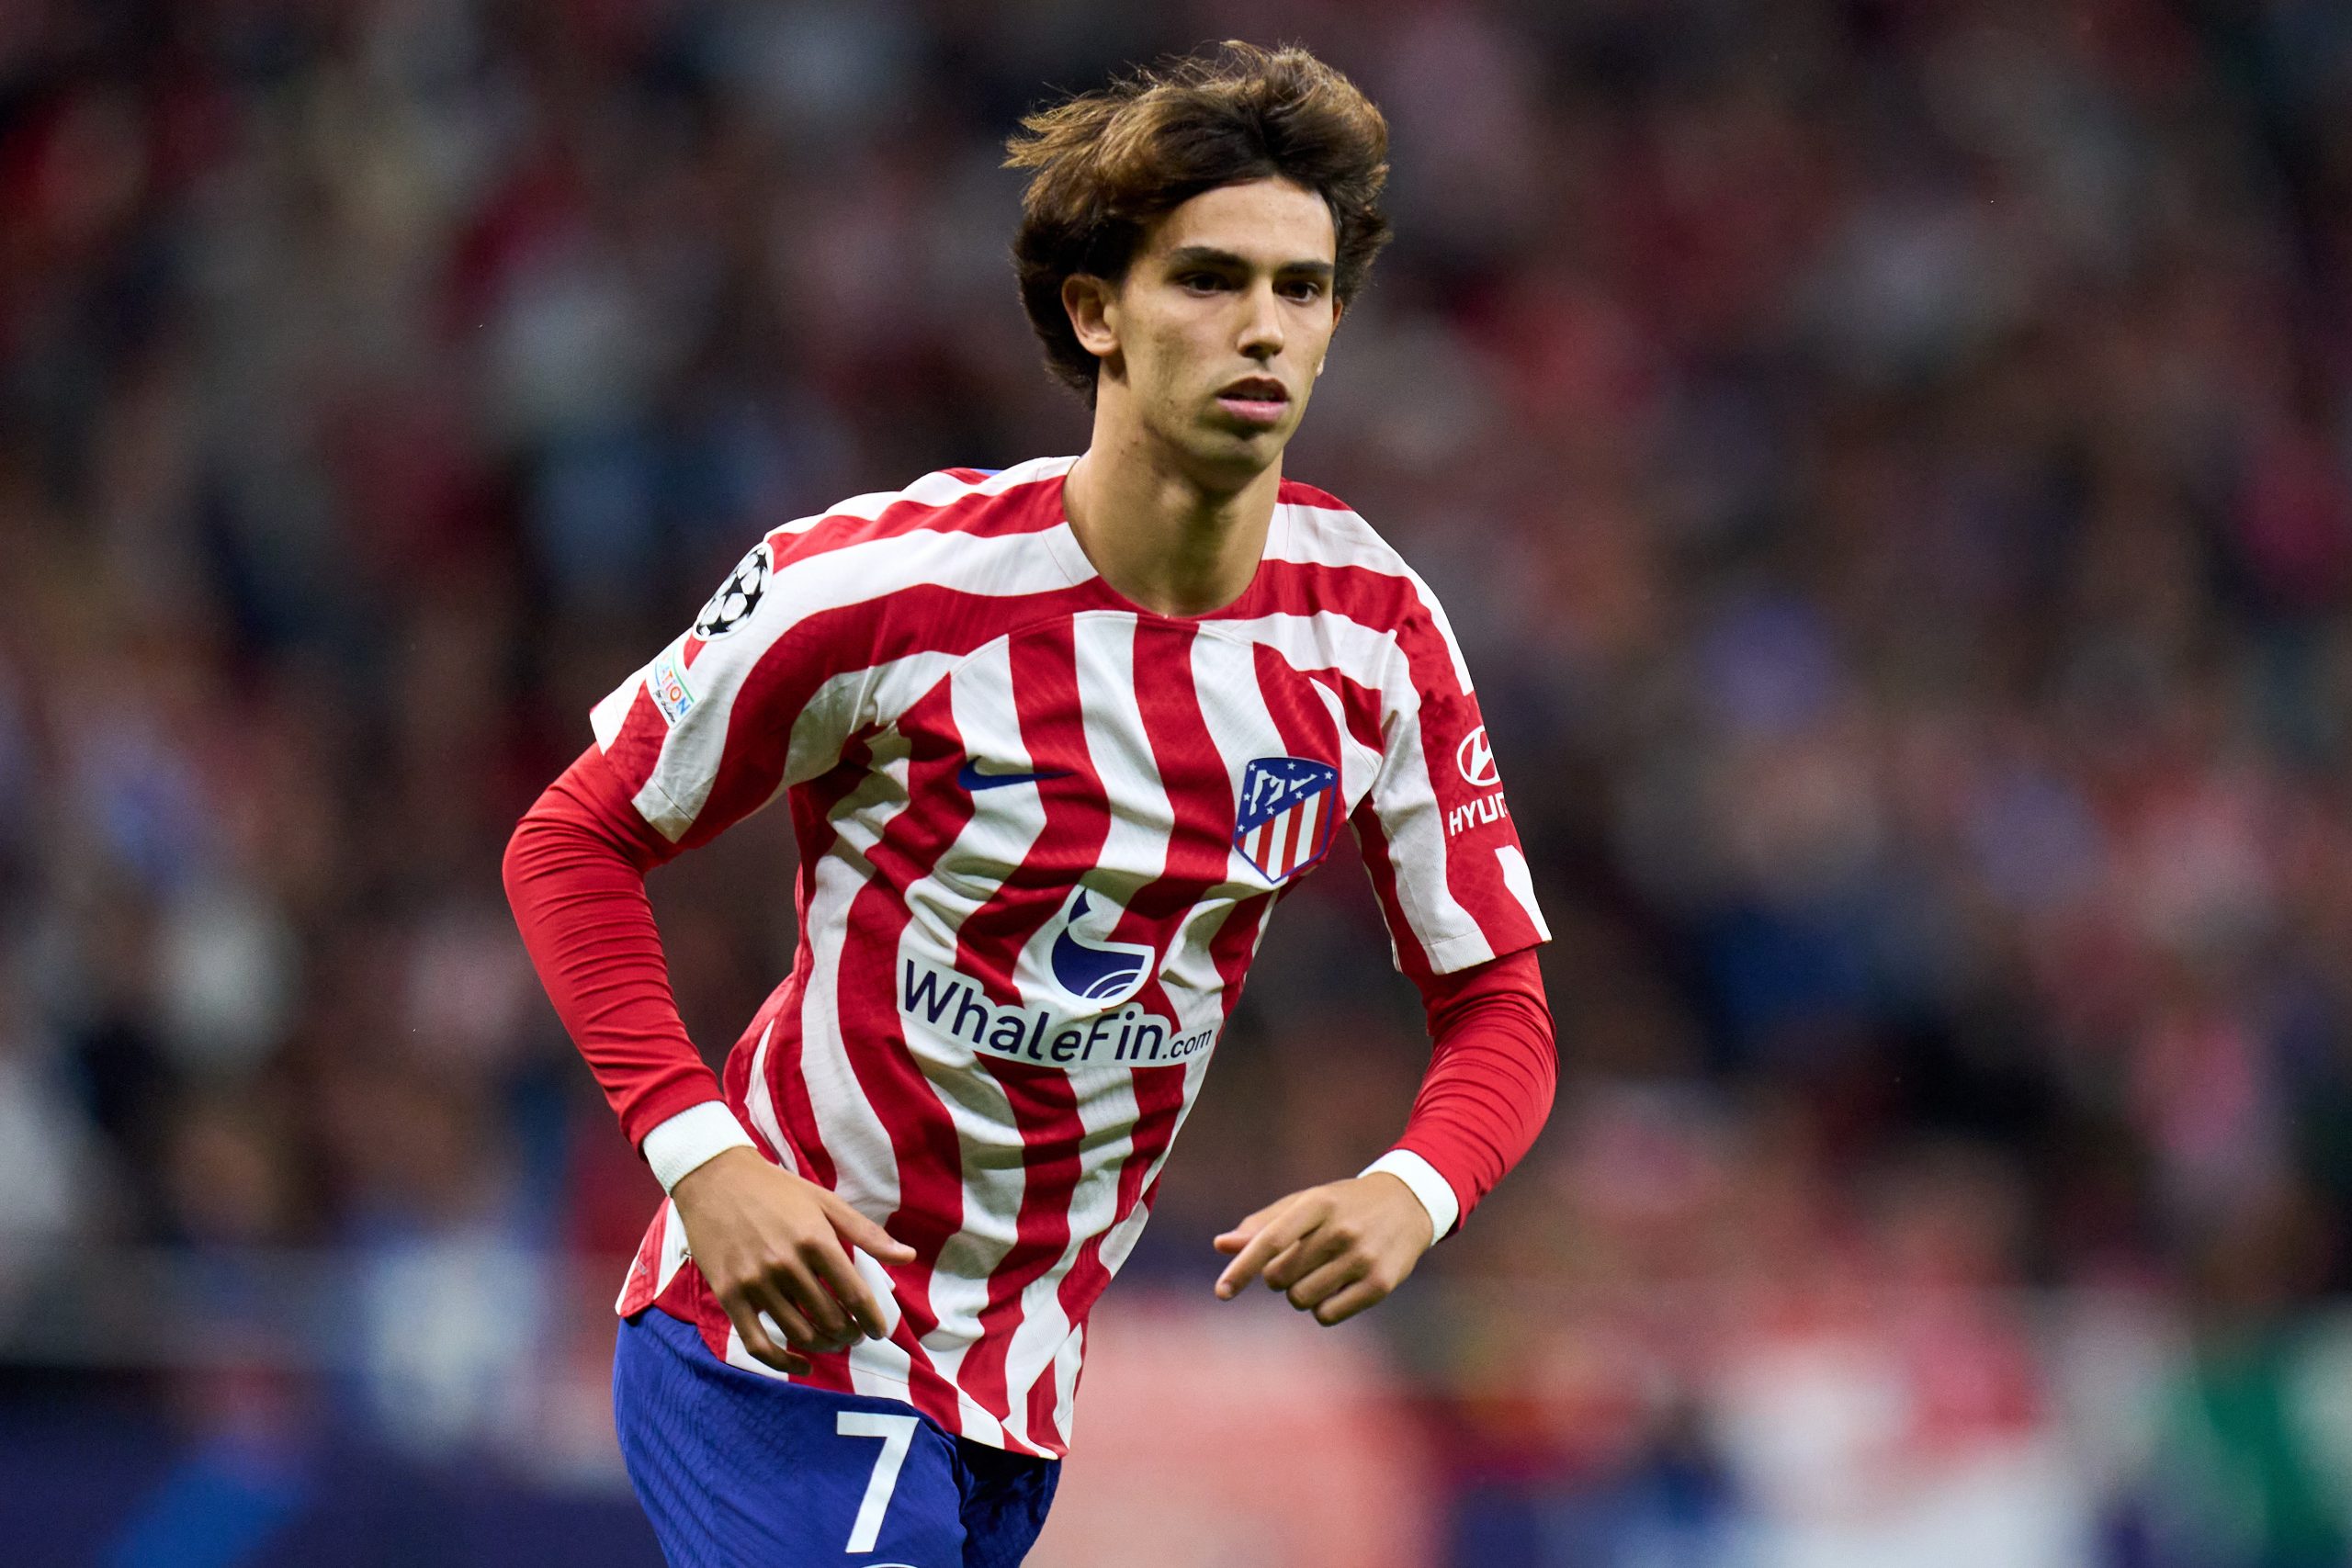 Diego Simeone claims Joao Felix "important" to Atletico Madrid amidst Manchester United links.